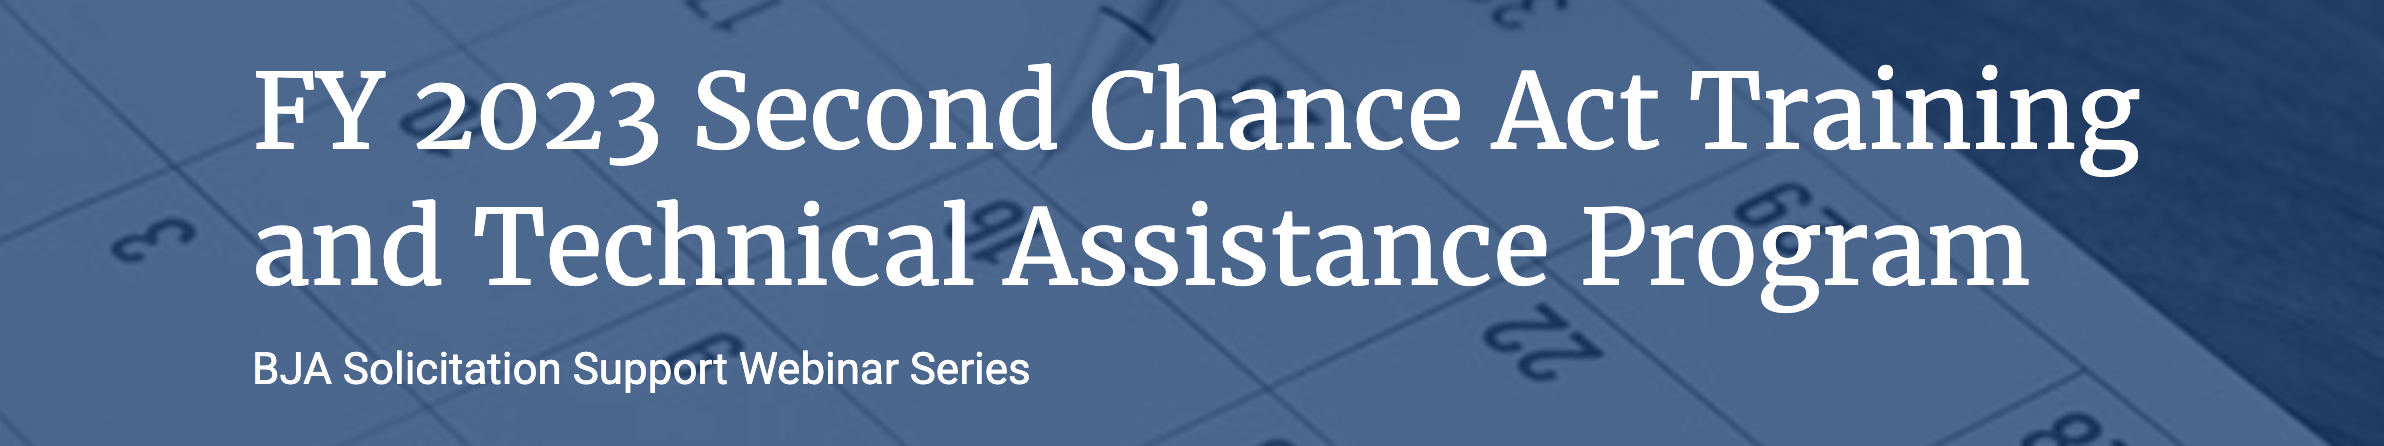 FY 2023 Second Chance Act Training and Technical Assistance Program